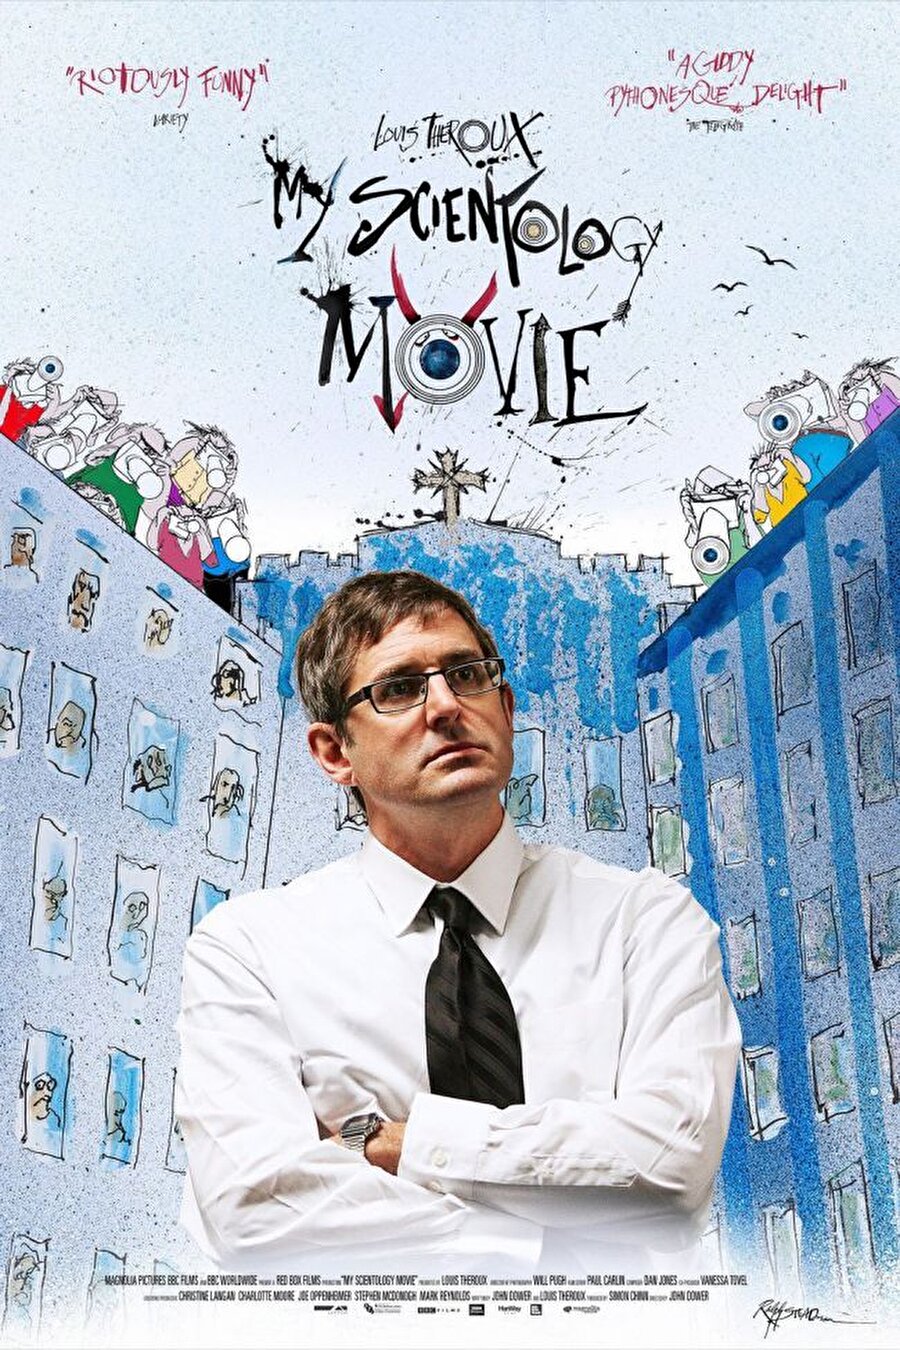 Louis Theroux: My Scientology Movie

                                    
                                    
                                    
                                
                                
                                